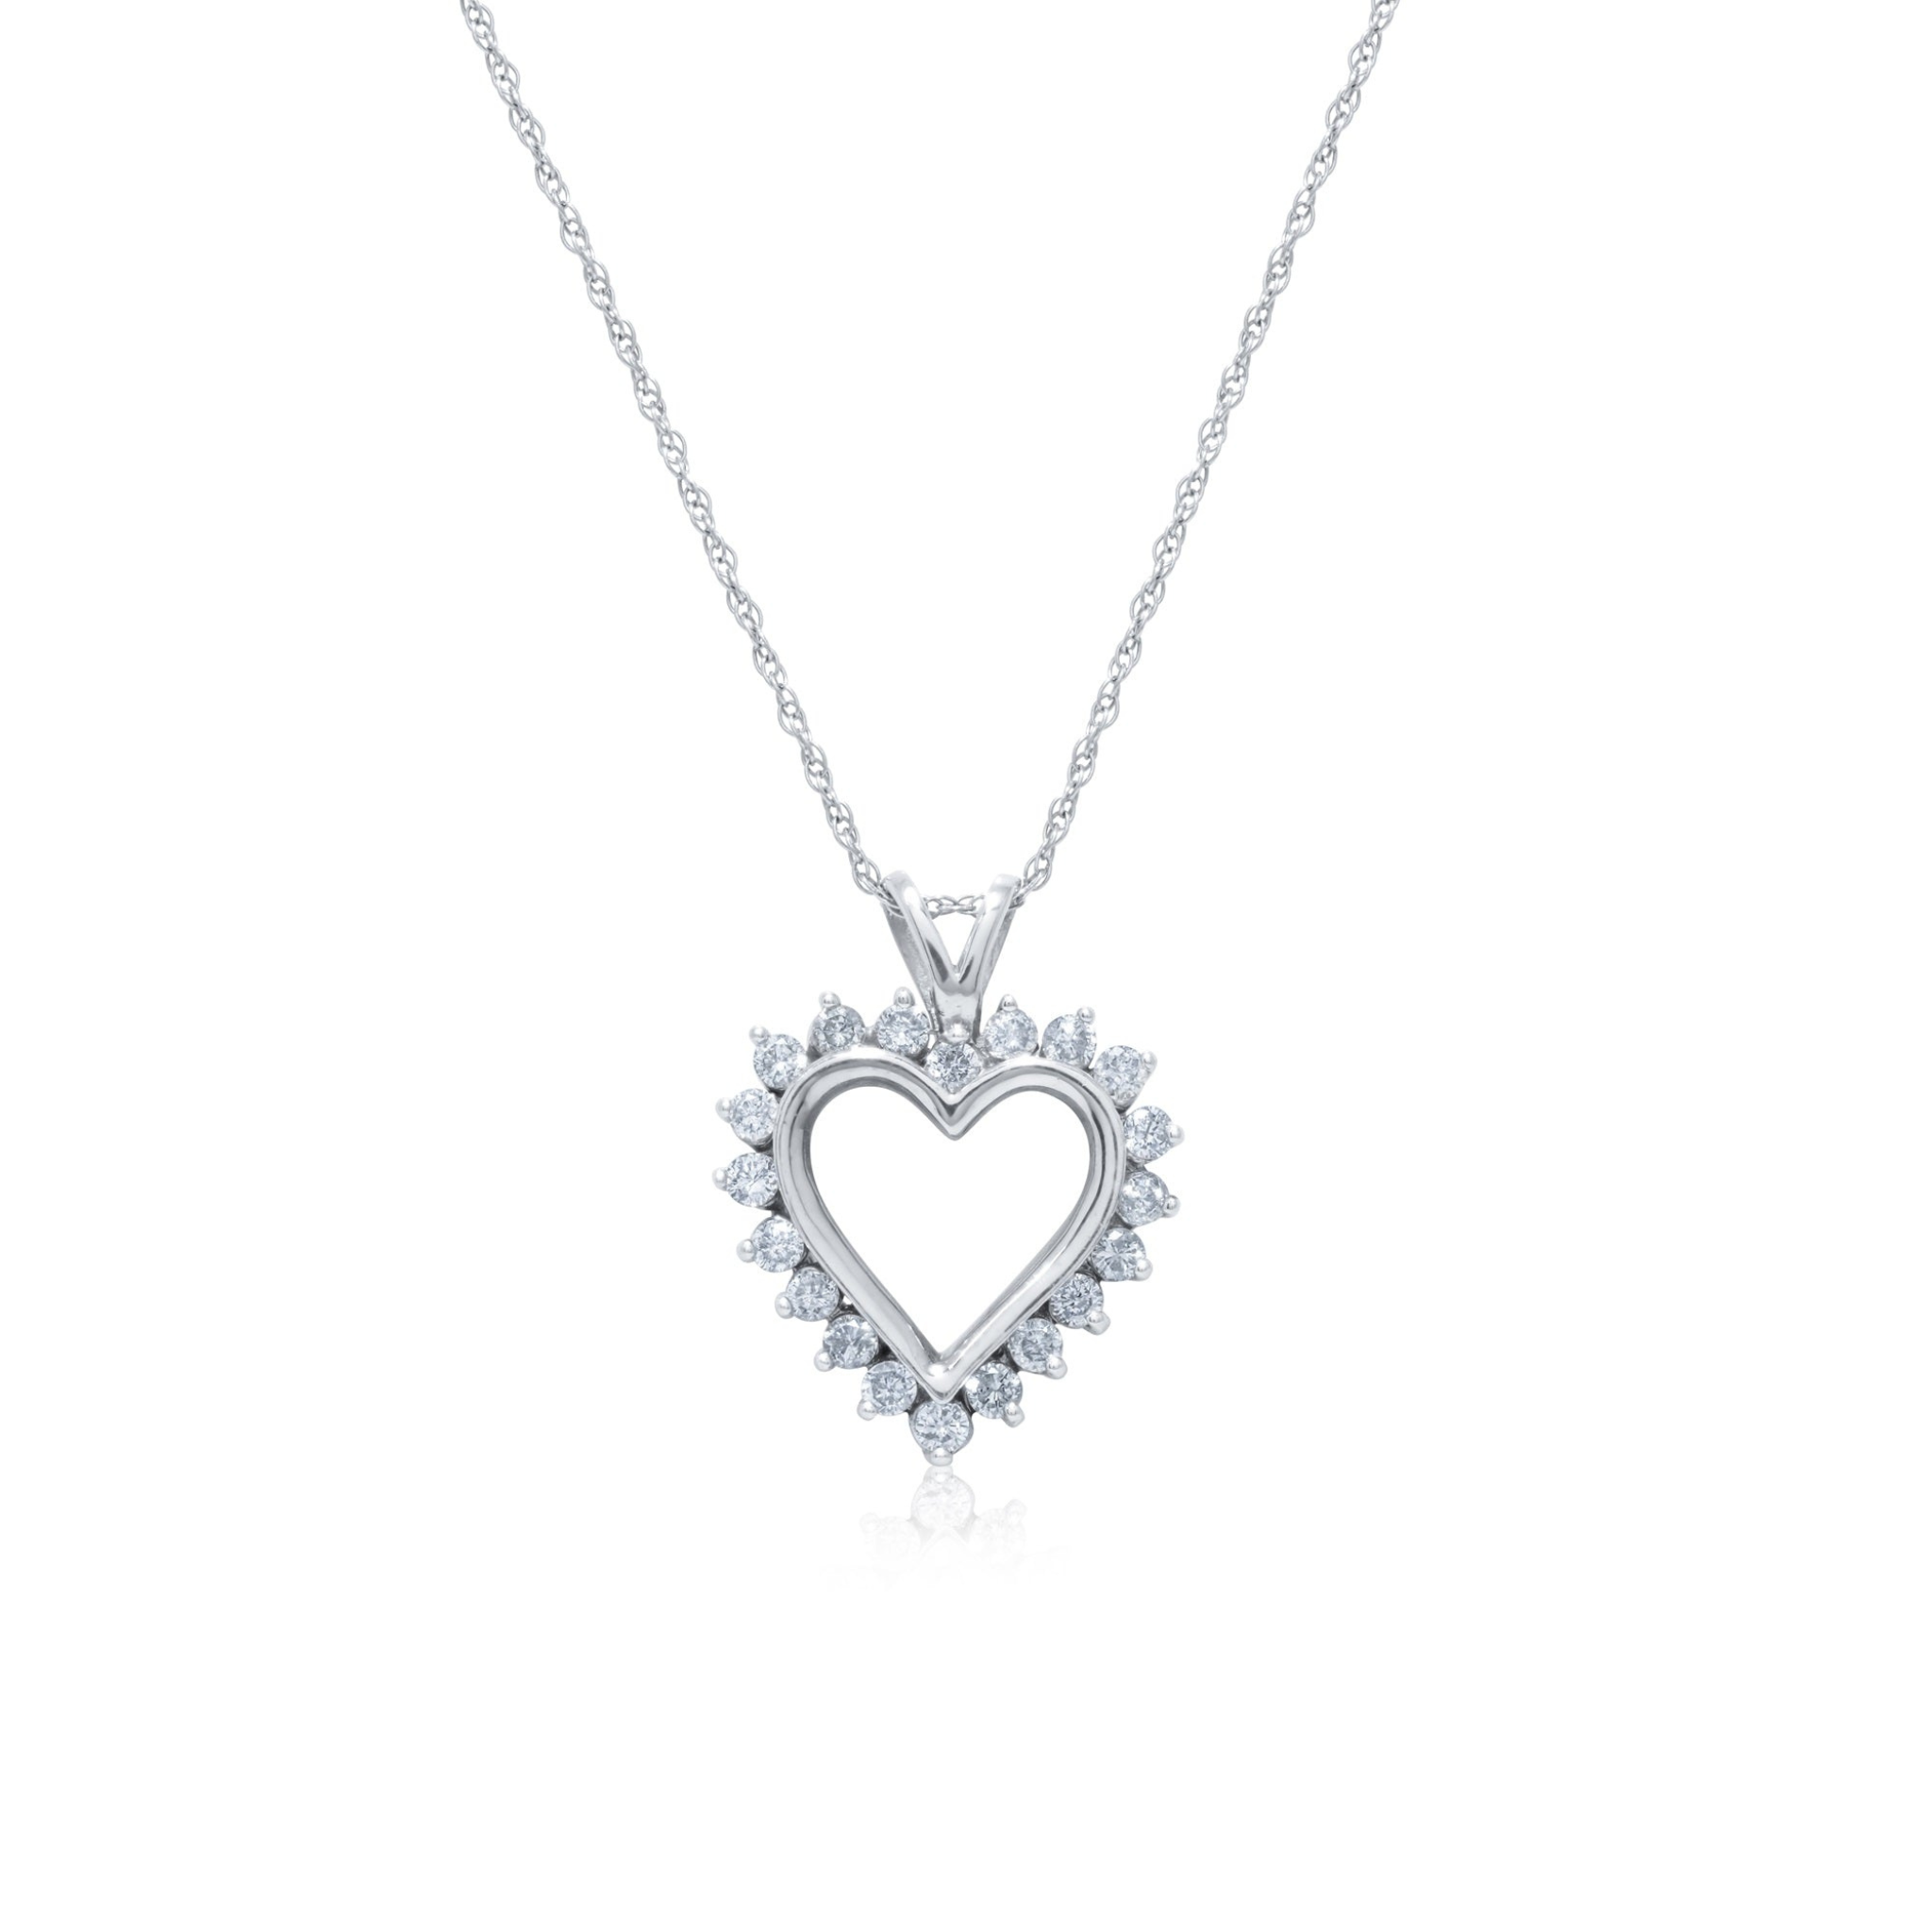 14kt White Gold Heart Shaped Diamond Pendant with 0.50 Cts.jpg